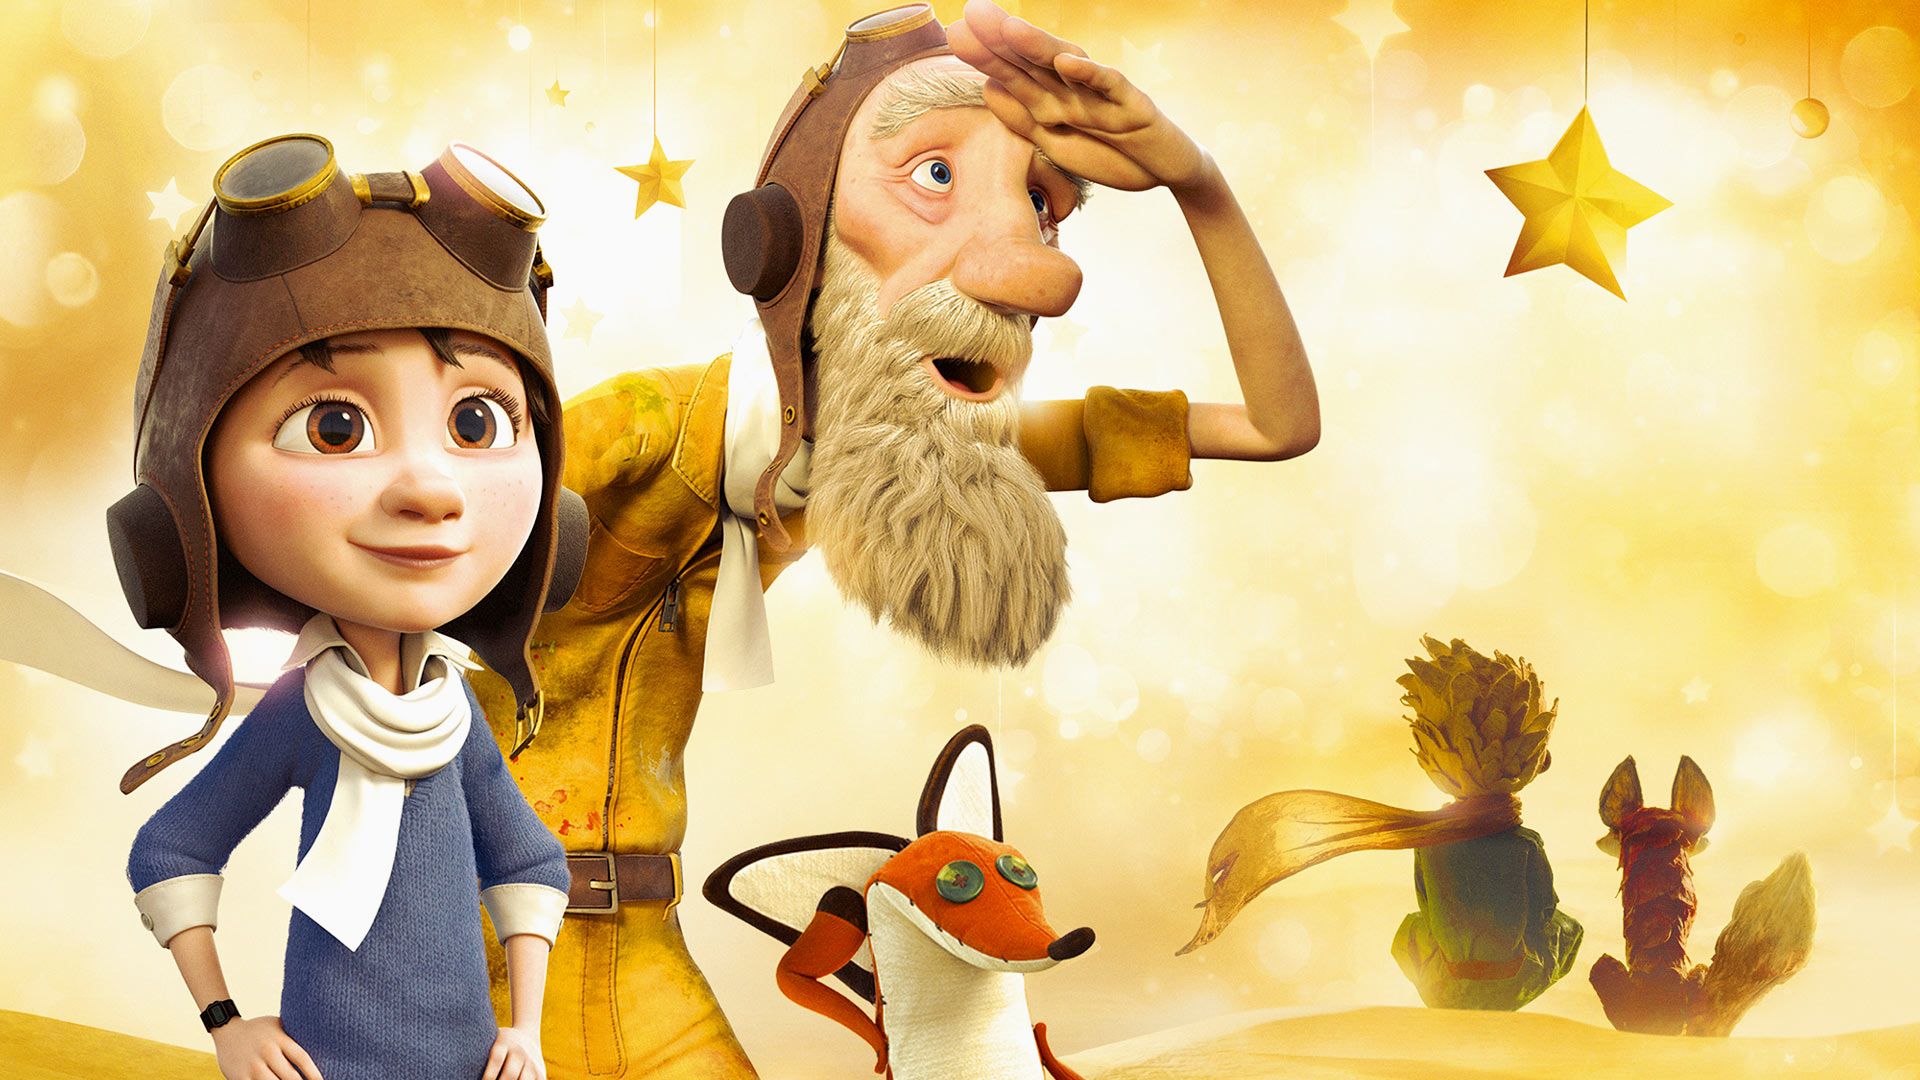 The Little Prince 2015 Movie wallpaper – Free full hd wallpapers ...